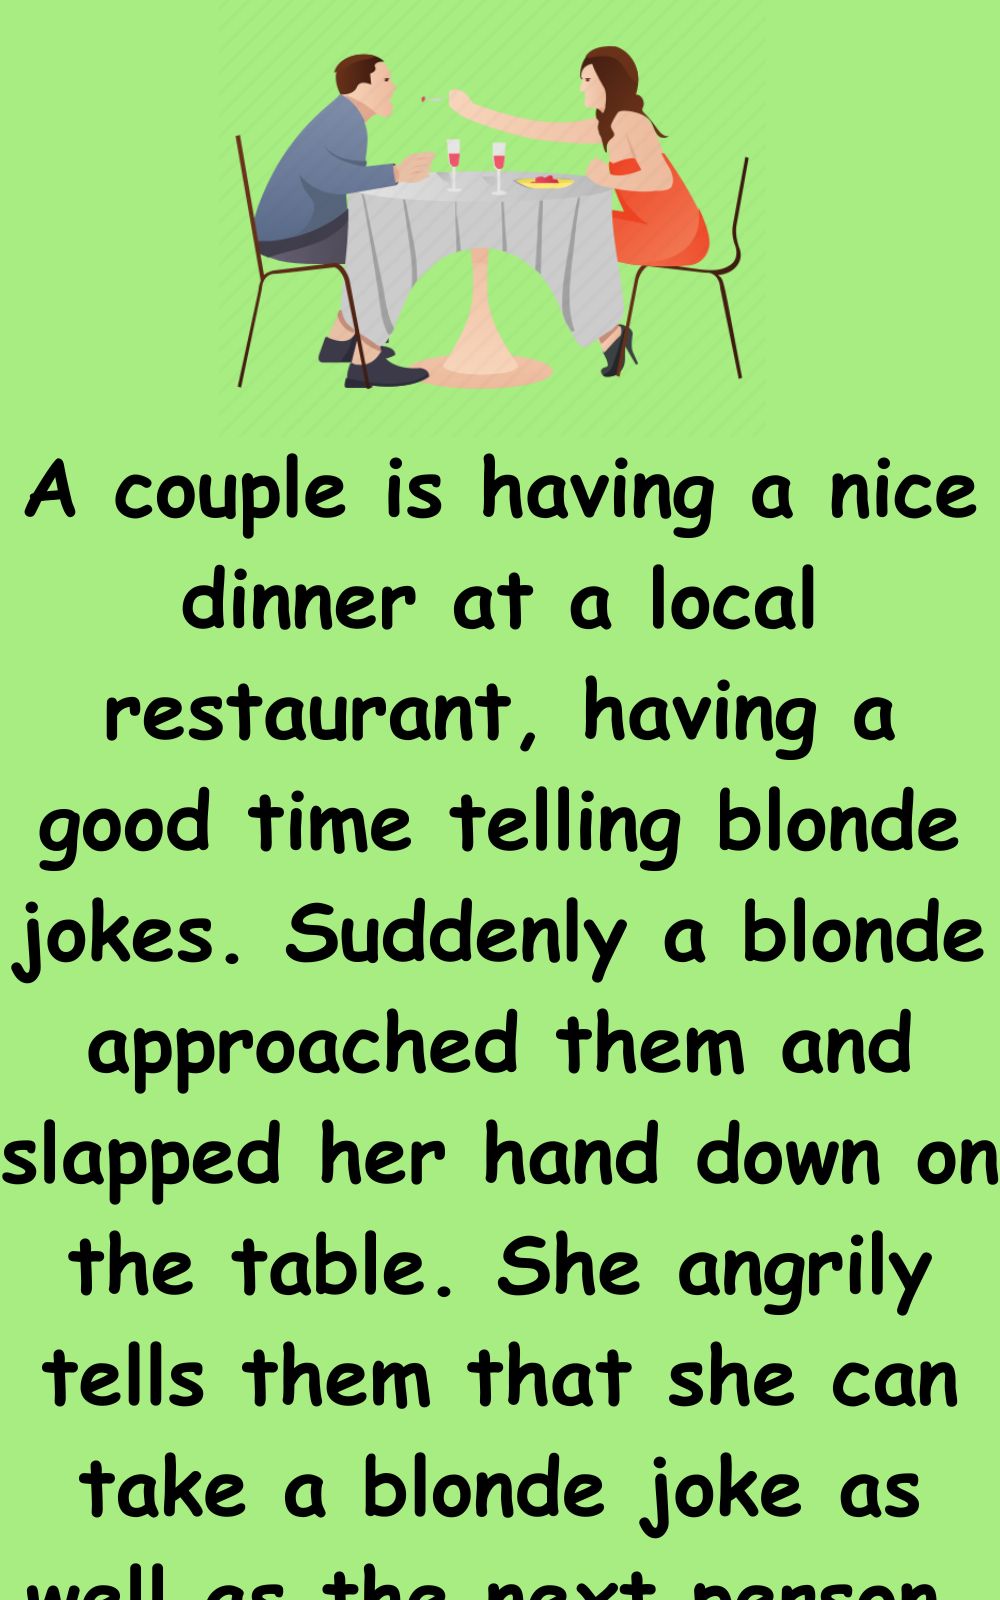 A couple is having a nice dinner at a local restaurant